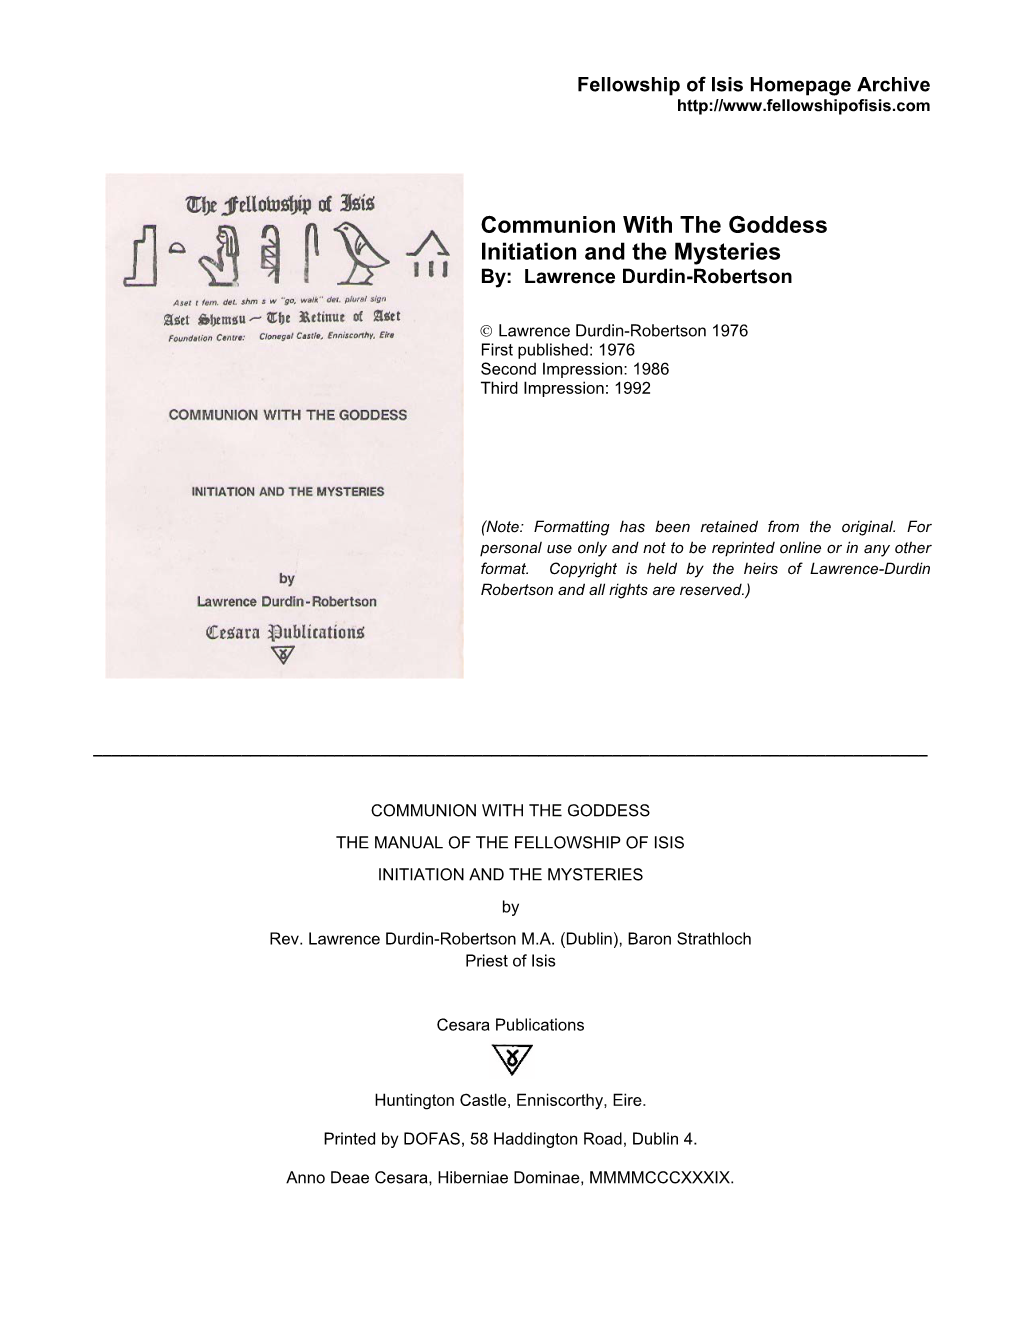 Communion with the Goddess Initiation and the Mysteries By: Lawrence Durdin-Robertson